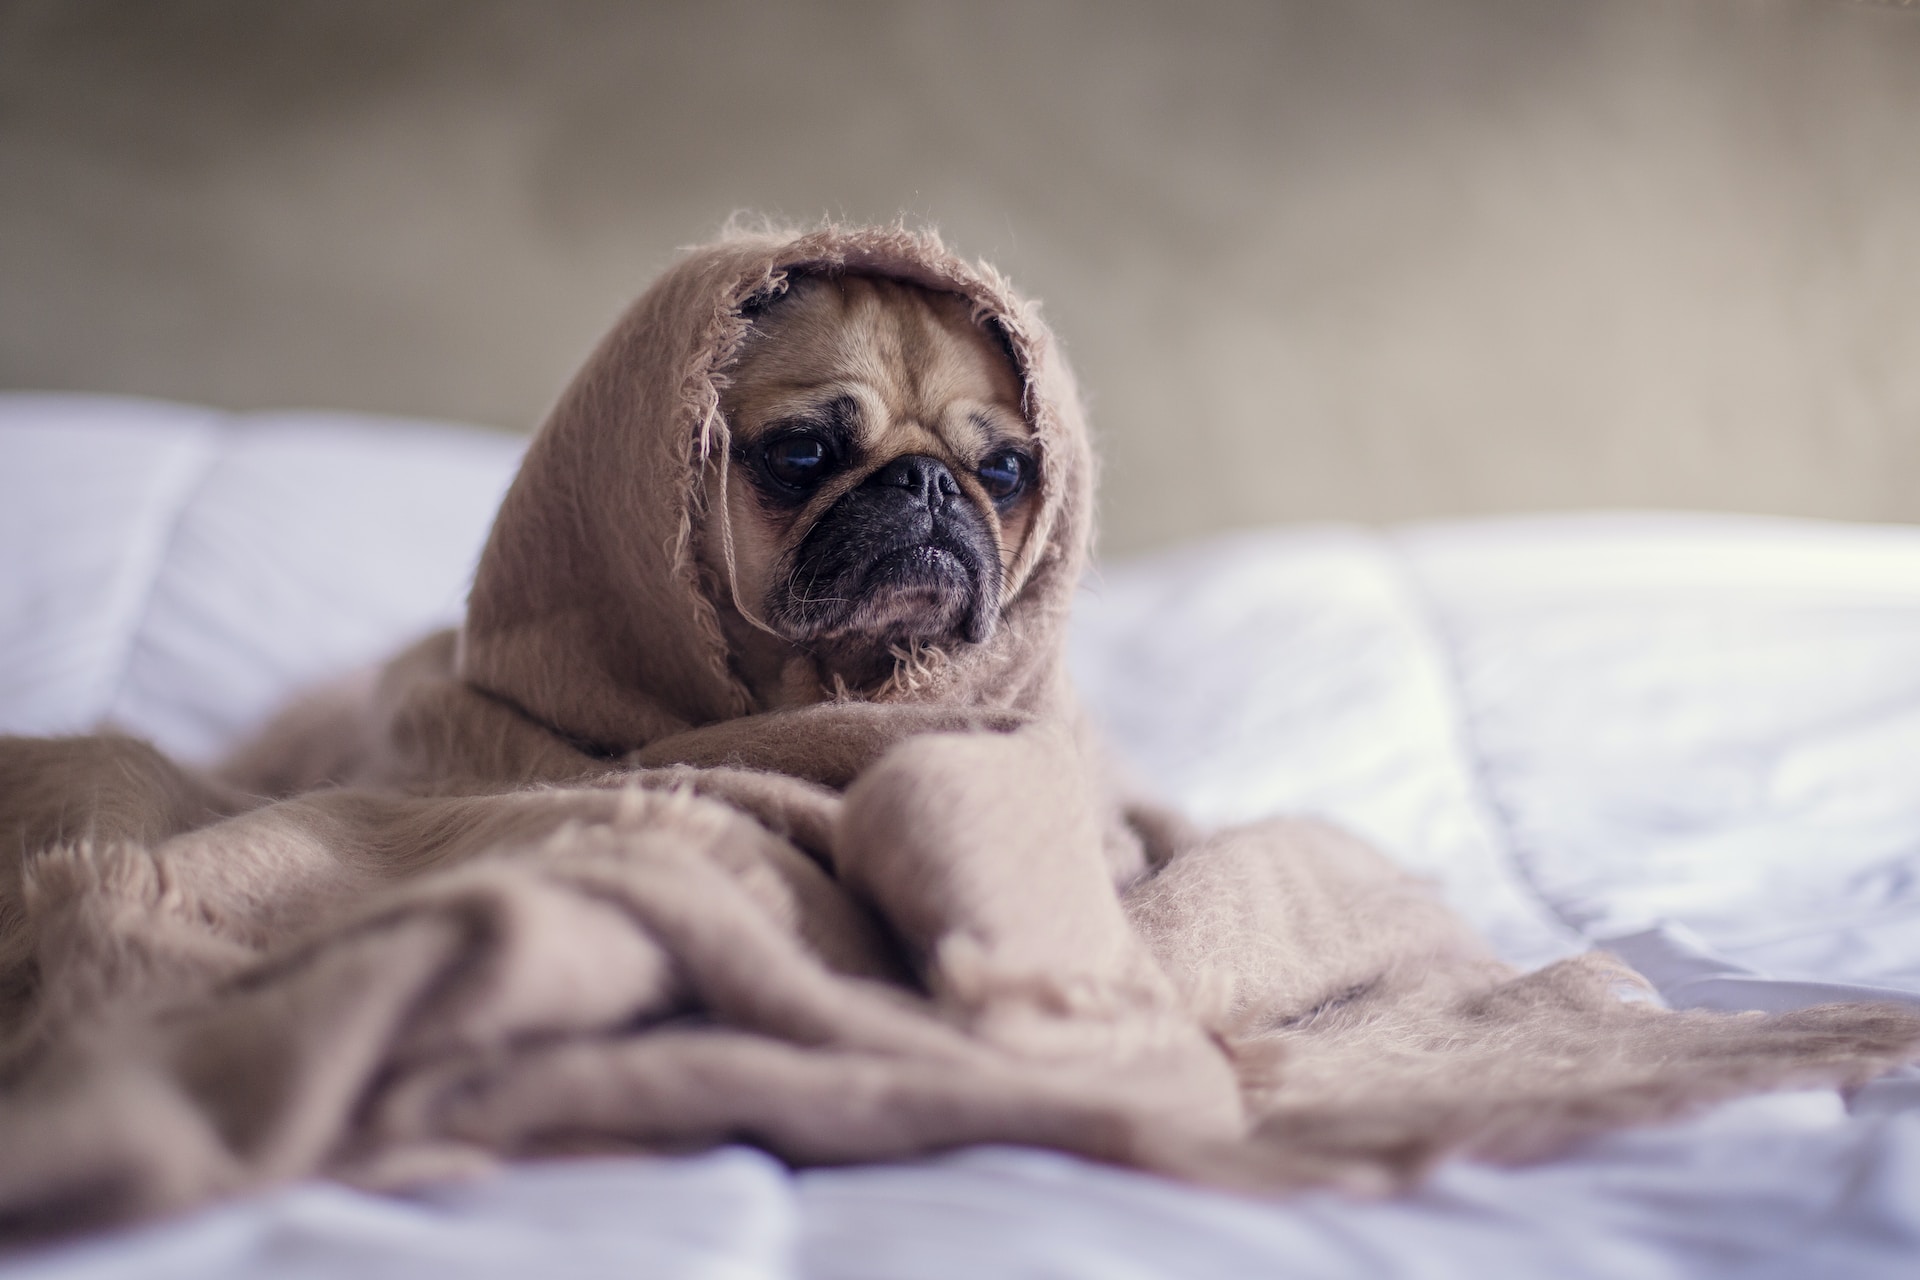 animals images & pictures, cute images & pictures, cozy, puppies images & pictures, sad face, sad mood, hopeless, website backgrounds, Monday, blanket, sleep, post, stress, warm, picture, fun